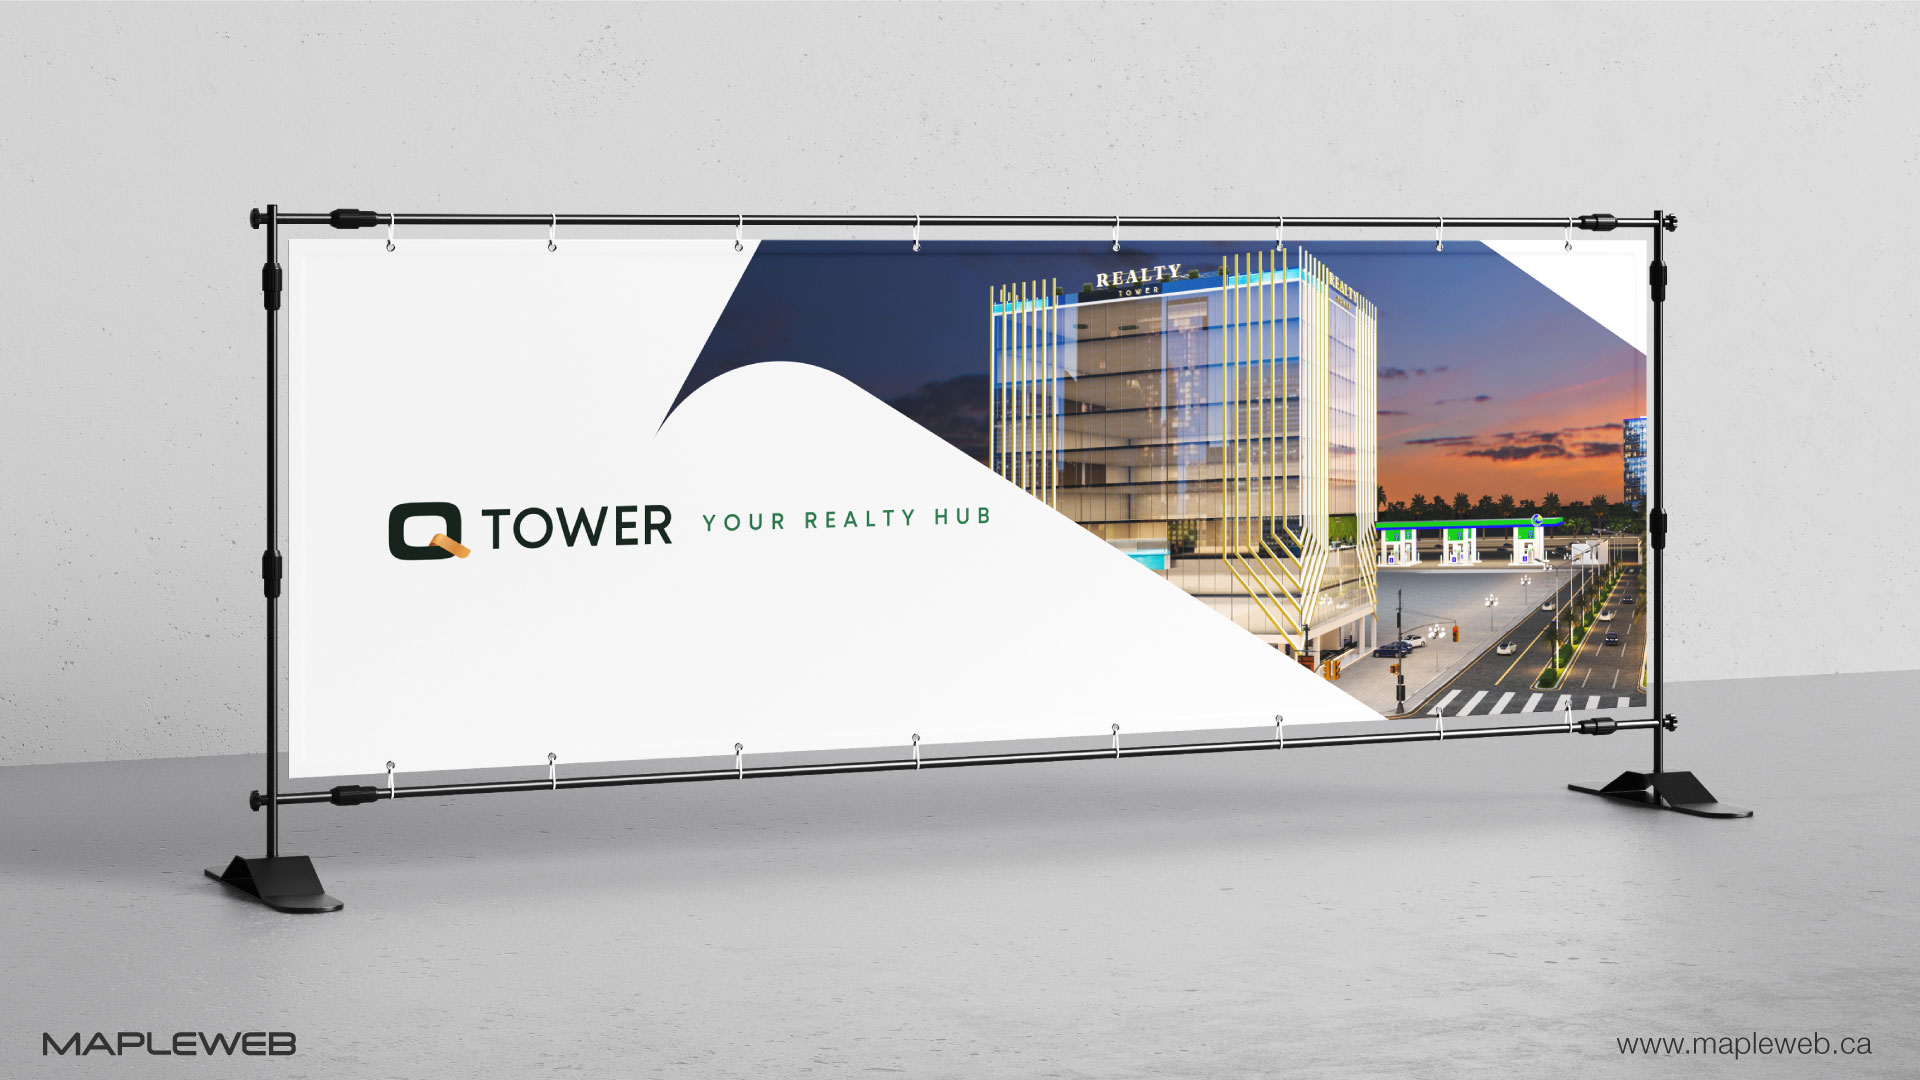 q-tower-brand-logo-design-by-mapleweb-vancouver-canada-outside-sign-mock